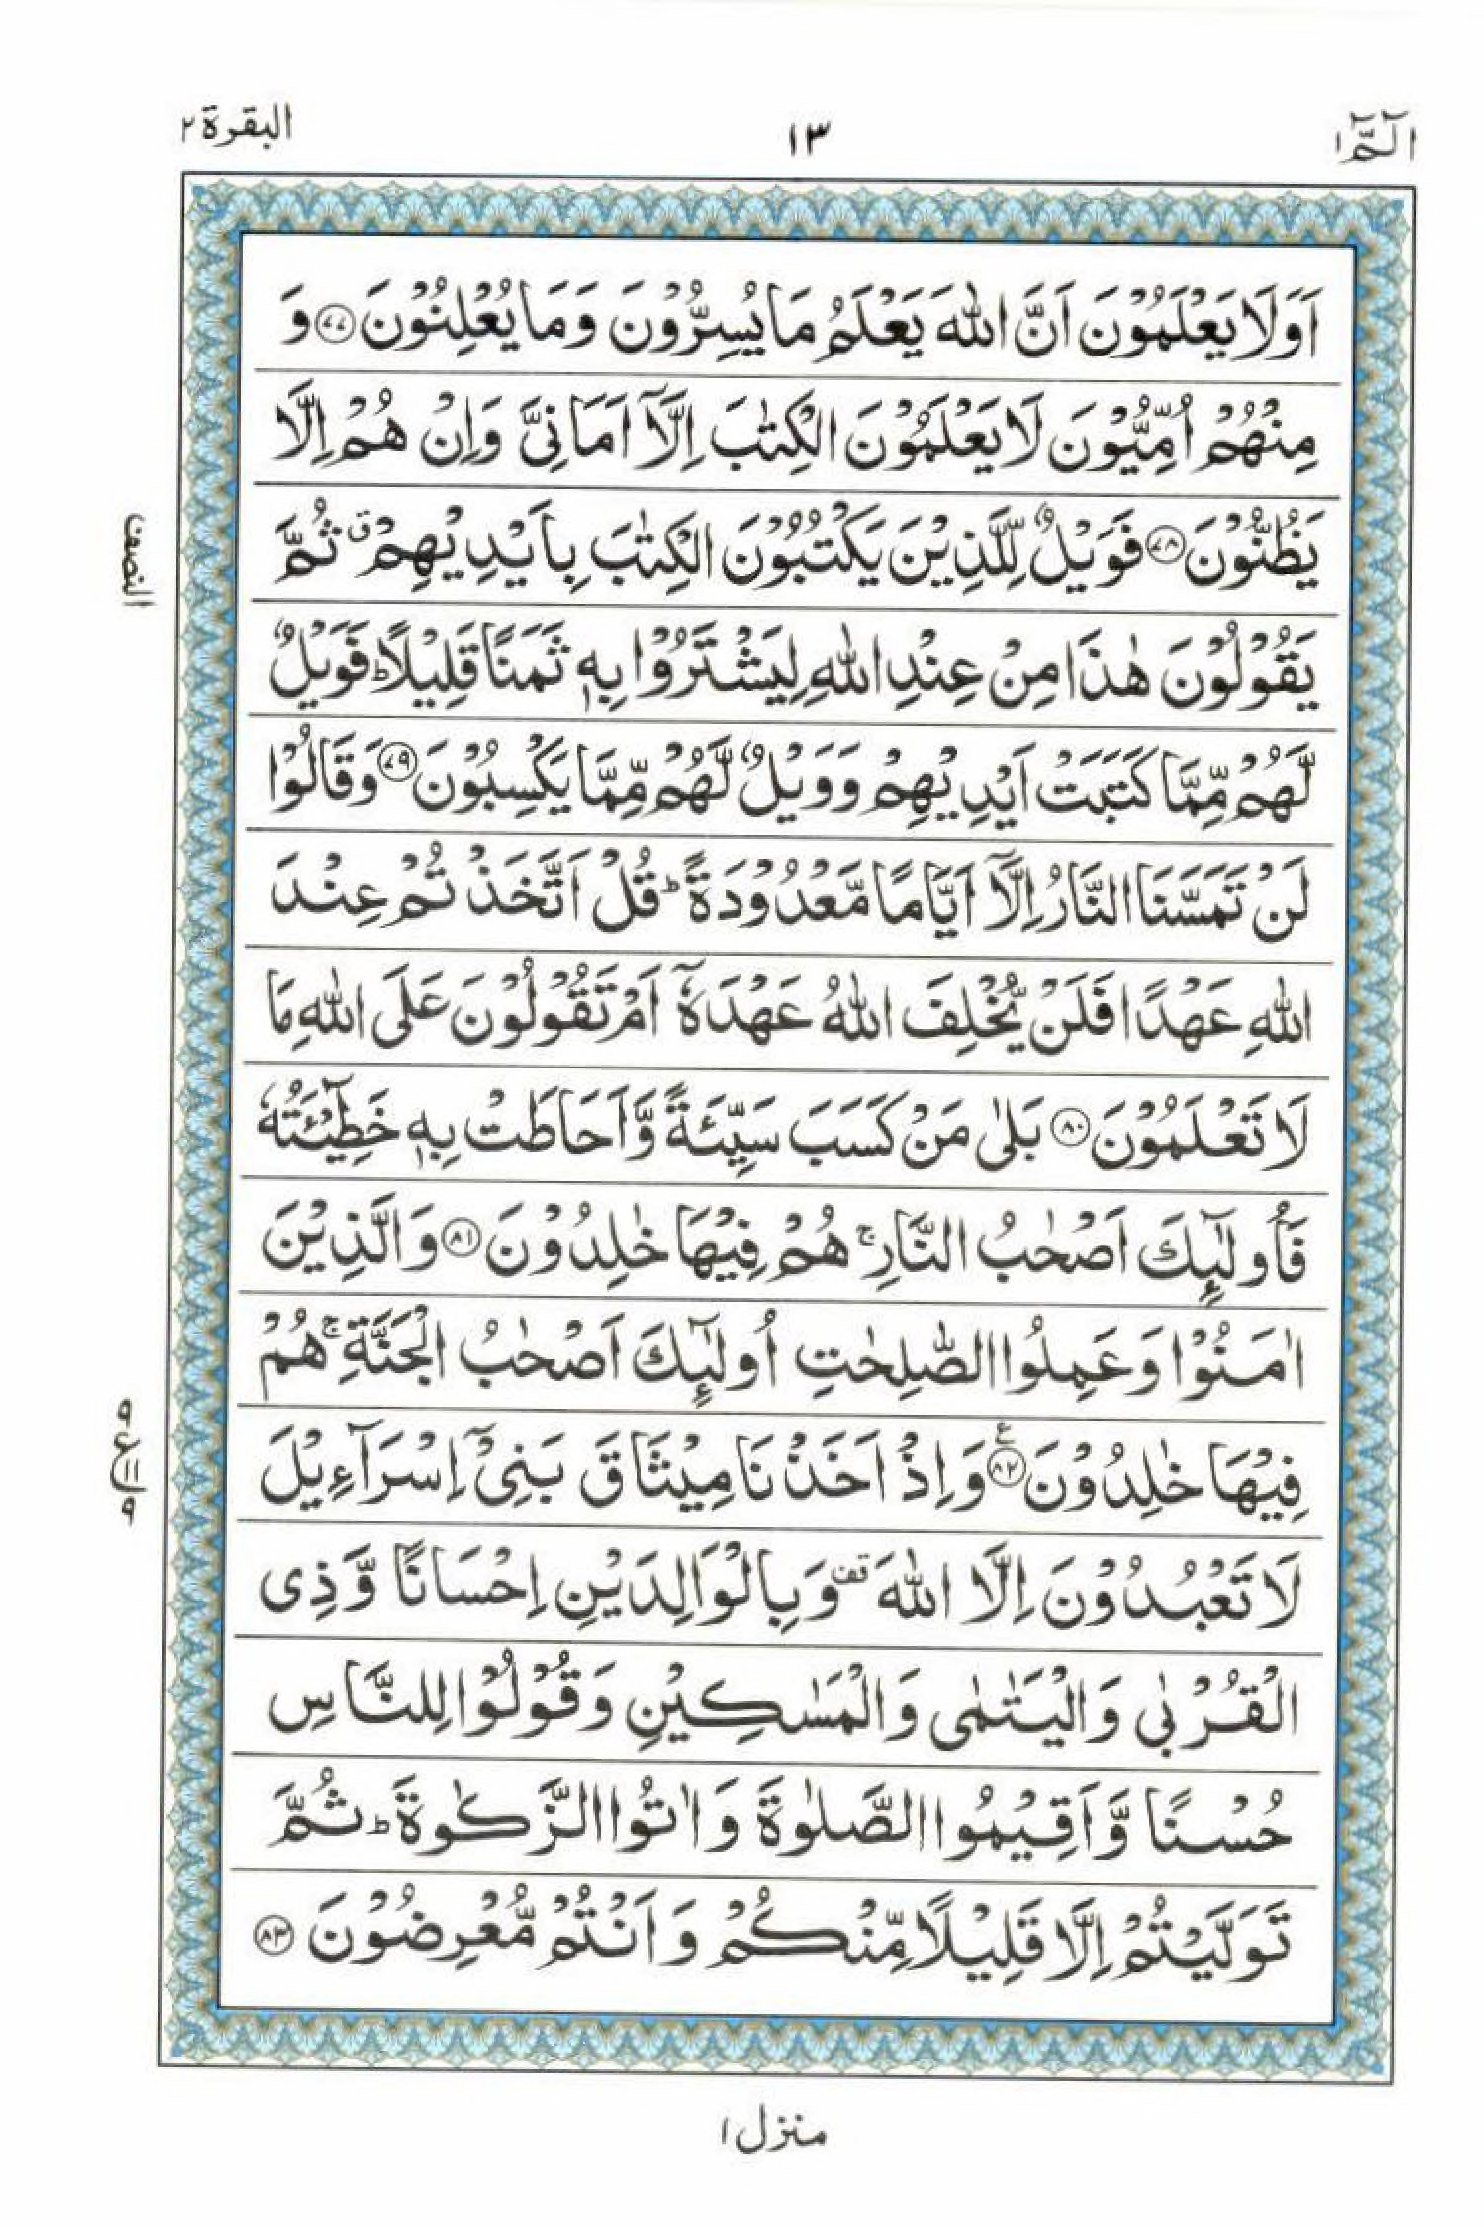 Read 15 Lines Quran, Part / Chapter / Siparah 1 Page 13